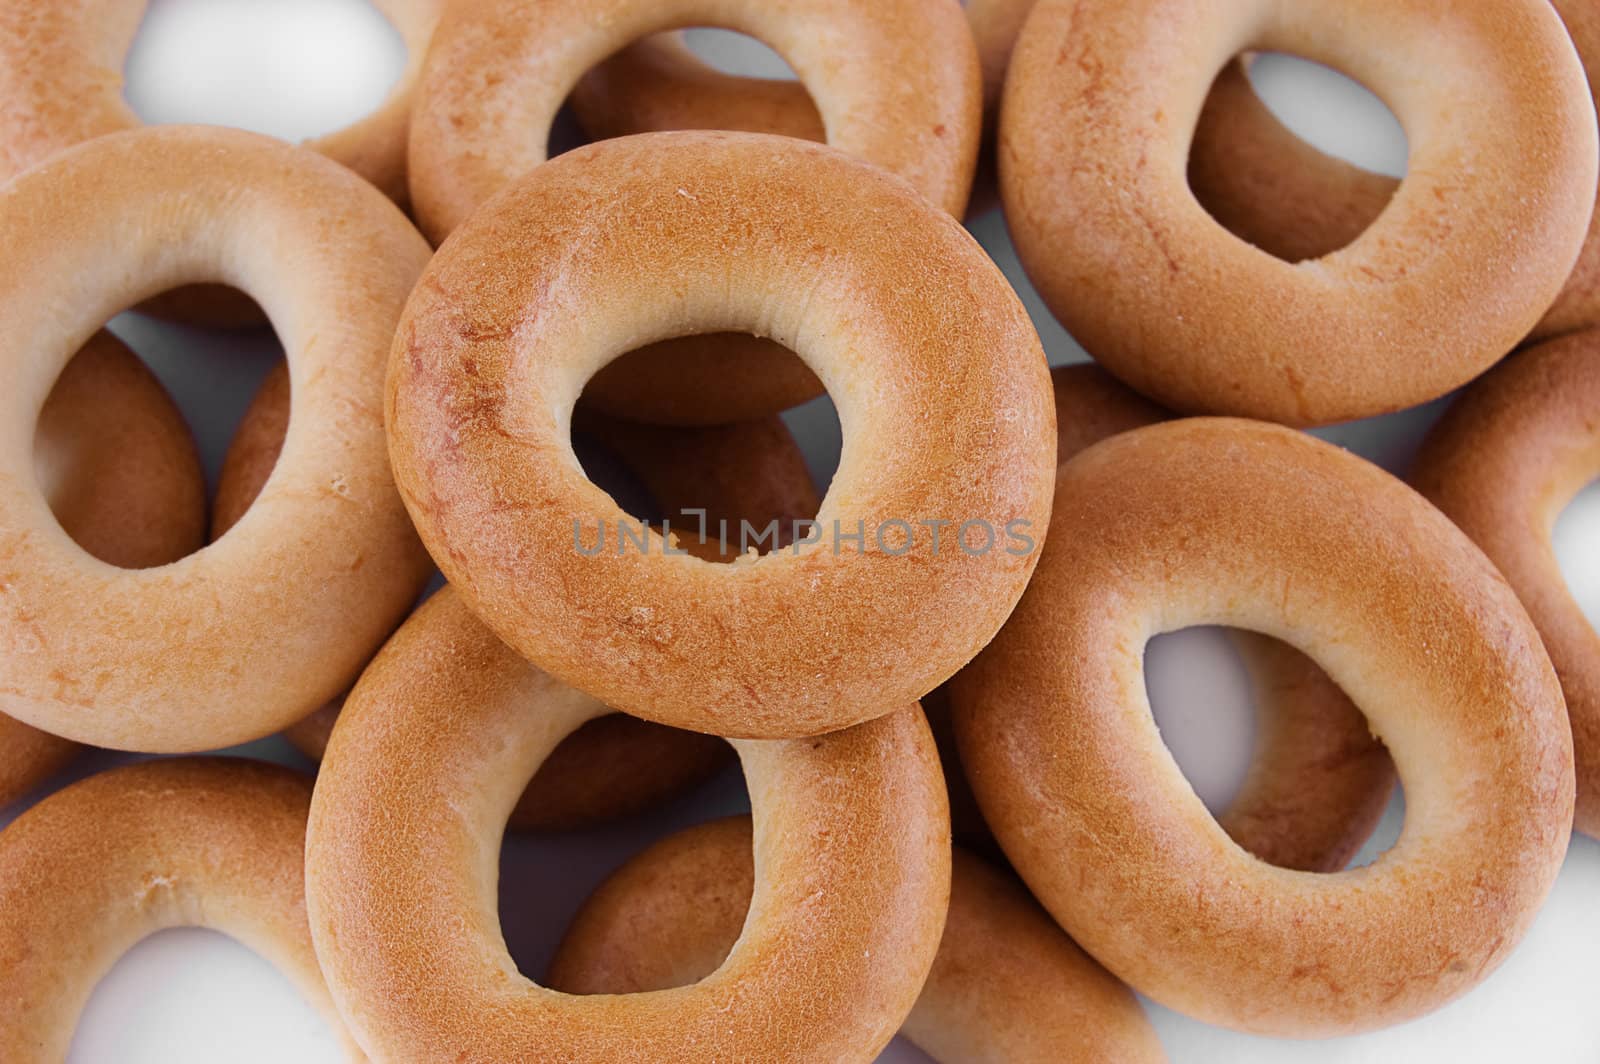 Pile of ring bagels as background